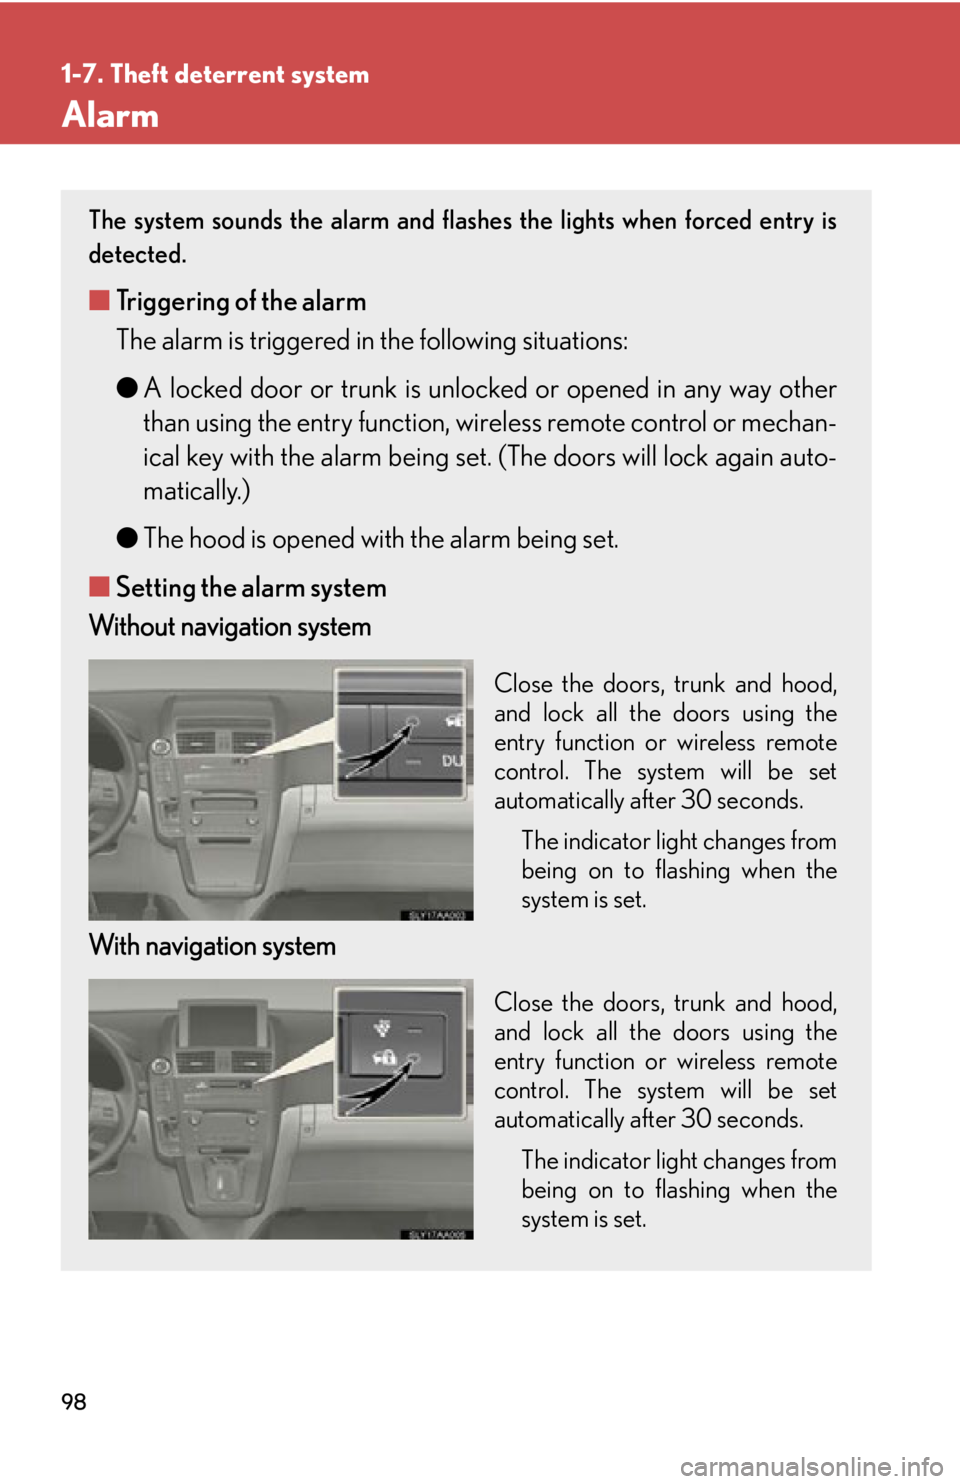 Lexus HS250h 2010  Setup / LEXUS 2010 HS250H  (OM75006U) Owners Guide 98
1-7. Theft deterrent system
Alarm
The system sounds the alarm and flashes the lights when forced entry is 
detected.
■Triggering of the alarm
The alarm is triggered in the following situations:
�